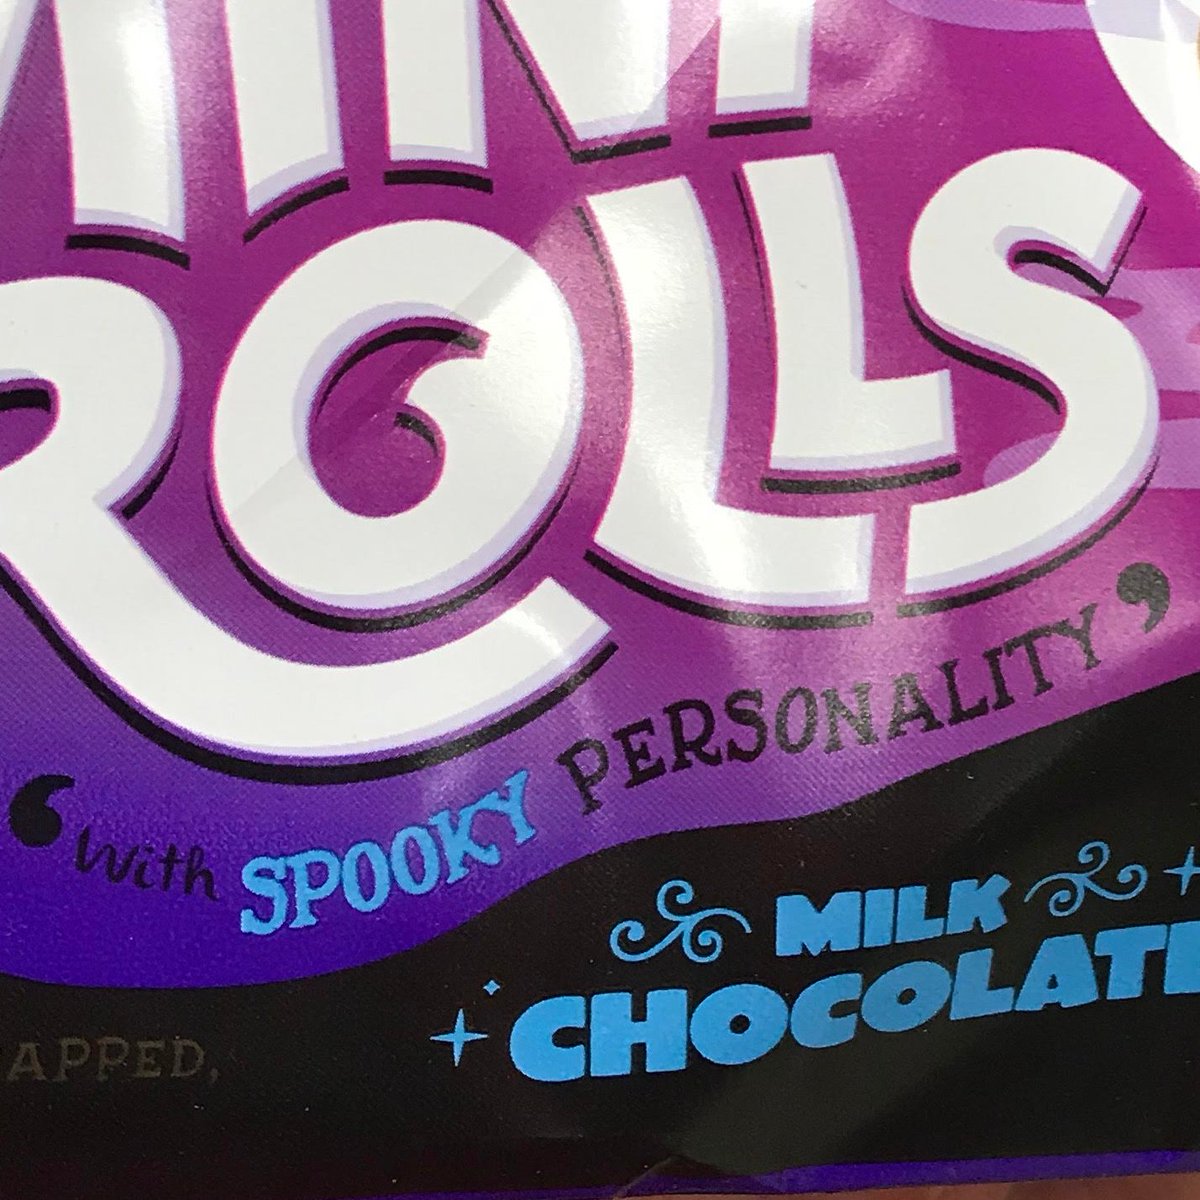 CADBURY MINI ROLLSEven by the rock-bottom standards of spooky products, this is low-effort: no halloween change whatsoever to the appearance or taste. I see they've even put "with spooky personality" in inverted commas, presumably to get around trading standards. Disgusting /5